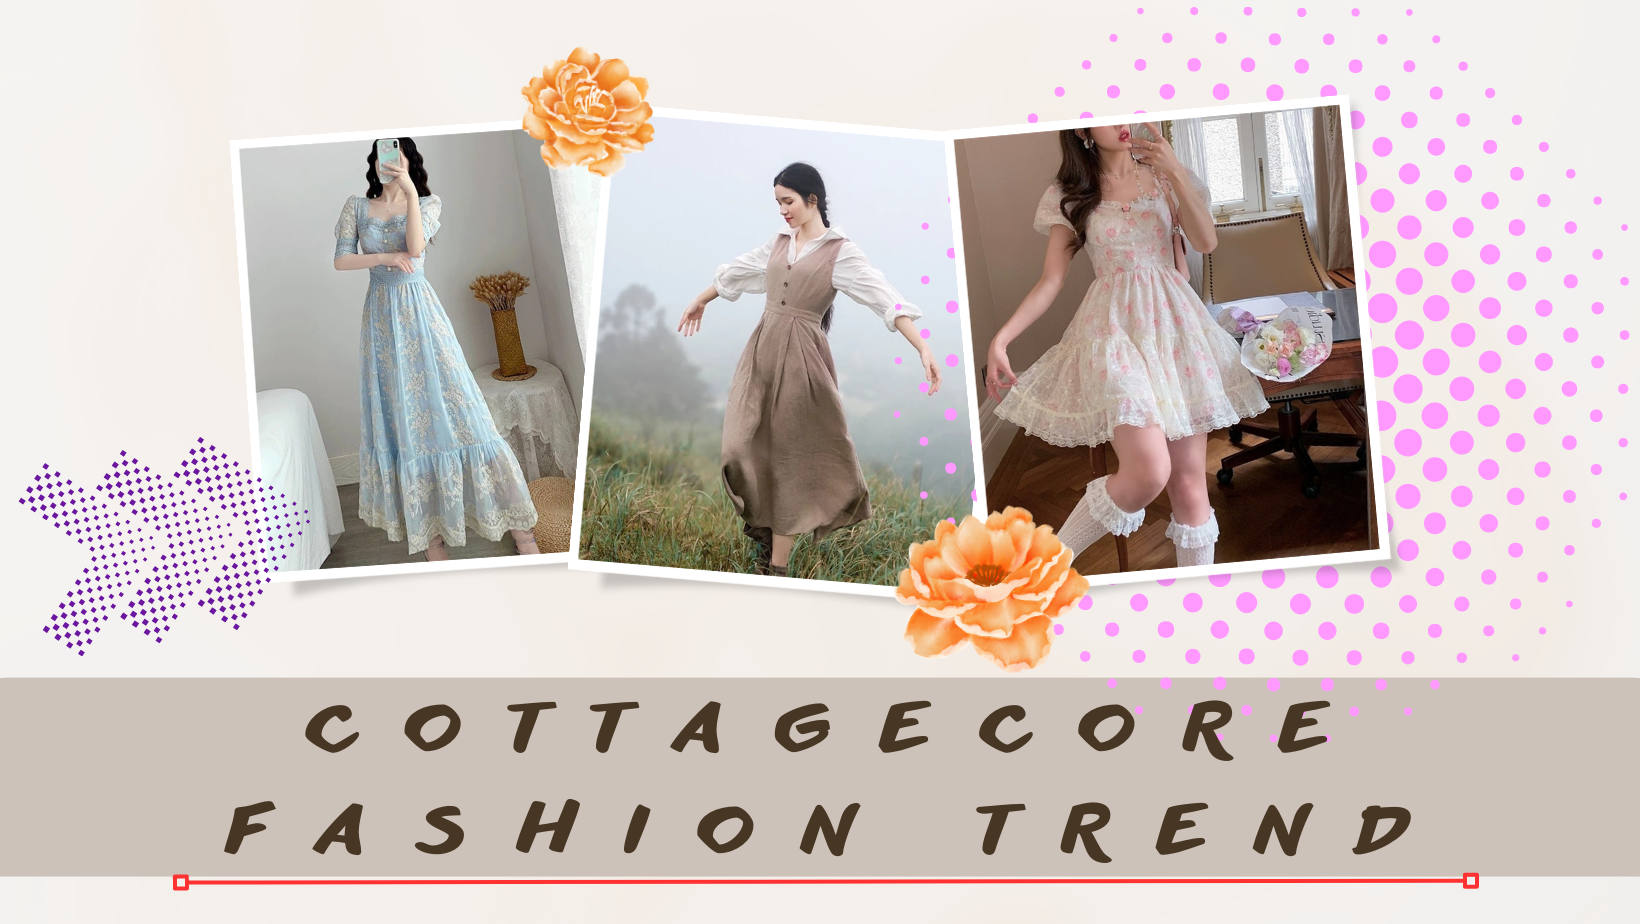 Cottagecore Fashion: A Guide to the Rustic Chic Trend